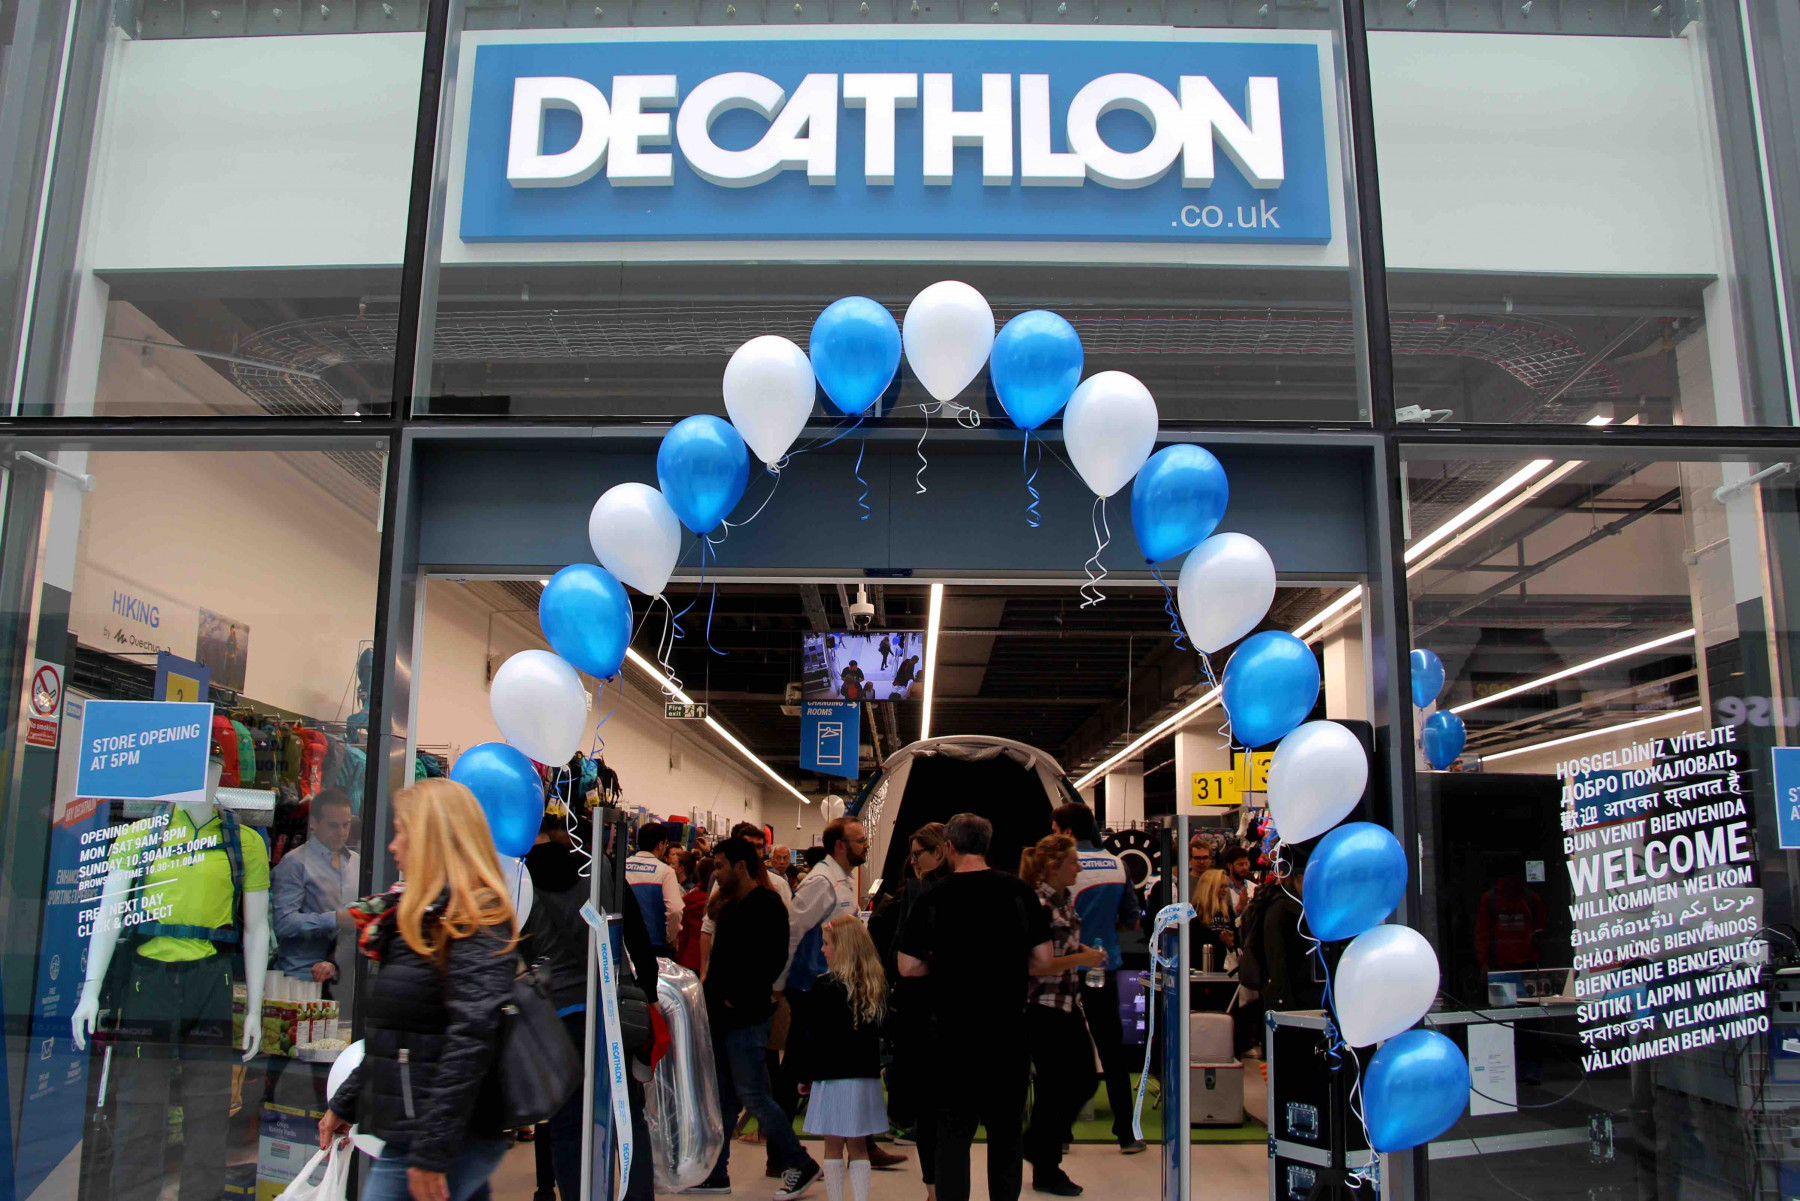 PR Agency One aims to help Decathlon to top spot in UK sports retailing Prolific North